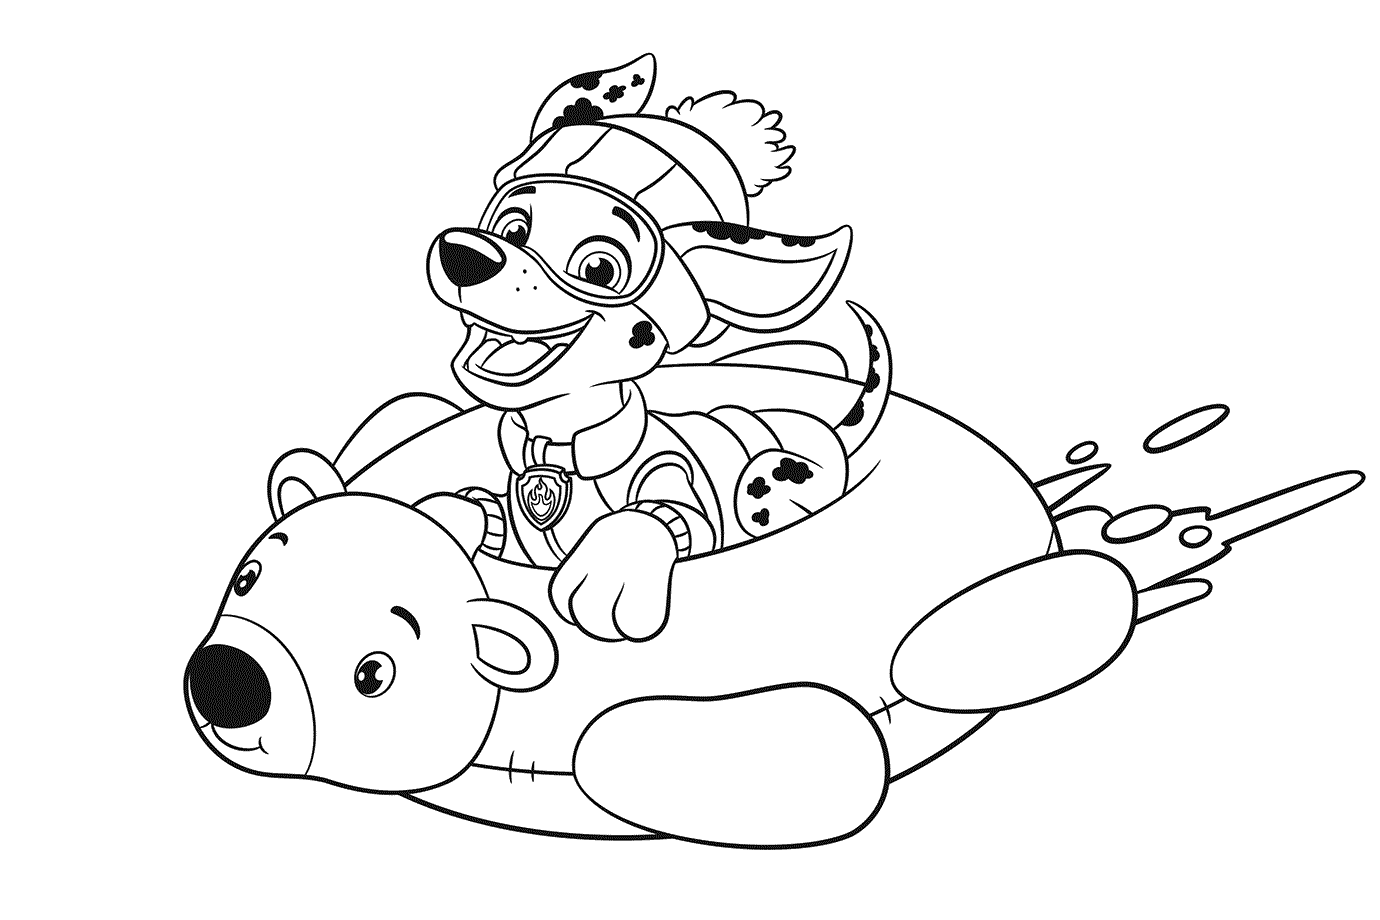 PAW Patrol Snow Sled Or Snow Tube Coloring Page